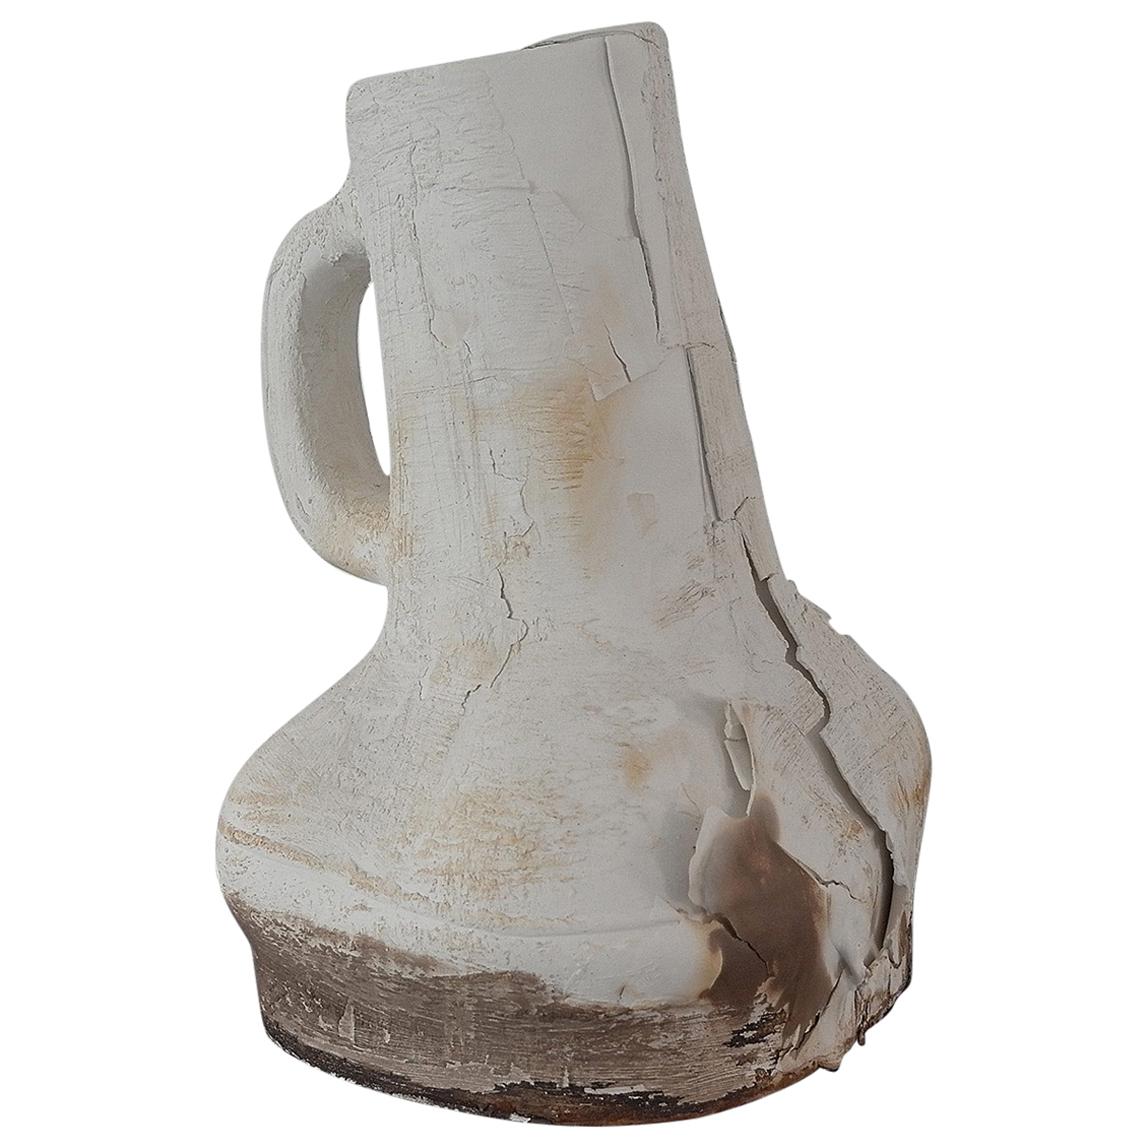 'Transformation, Second Skin' Ceramic Kettle by Nacho Carbonell